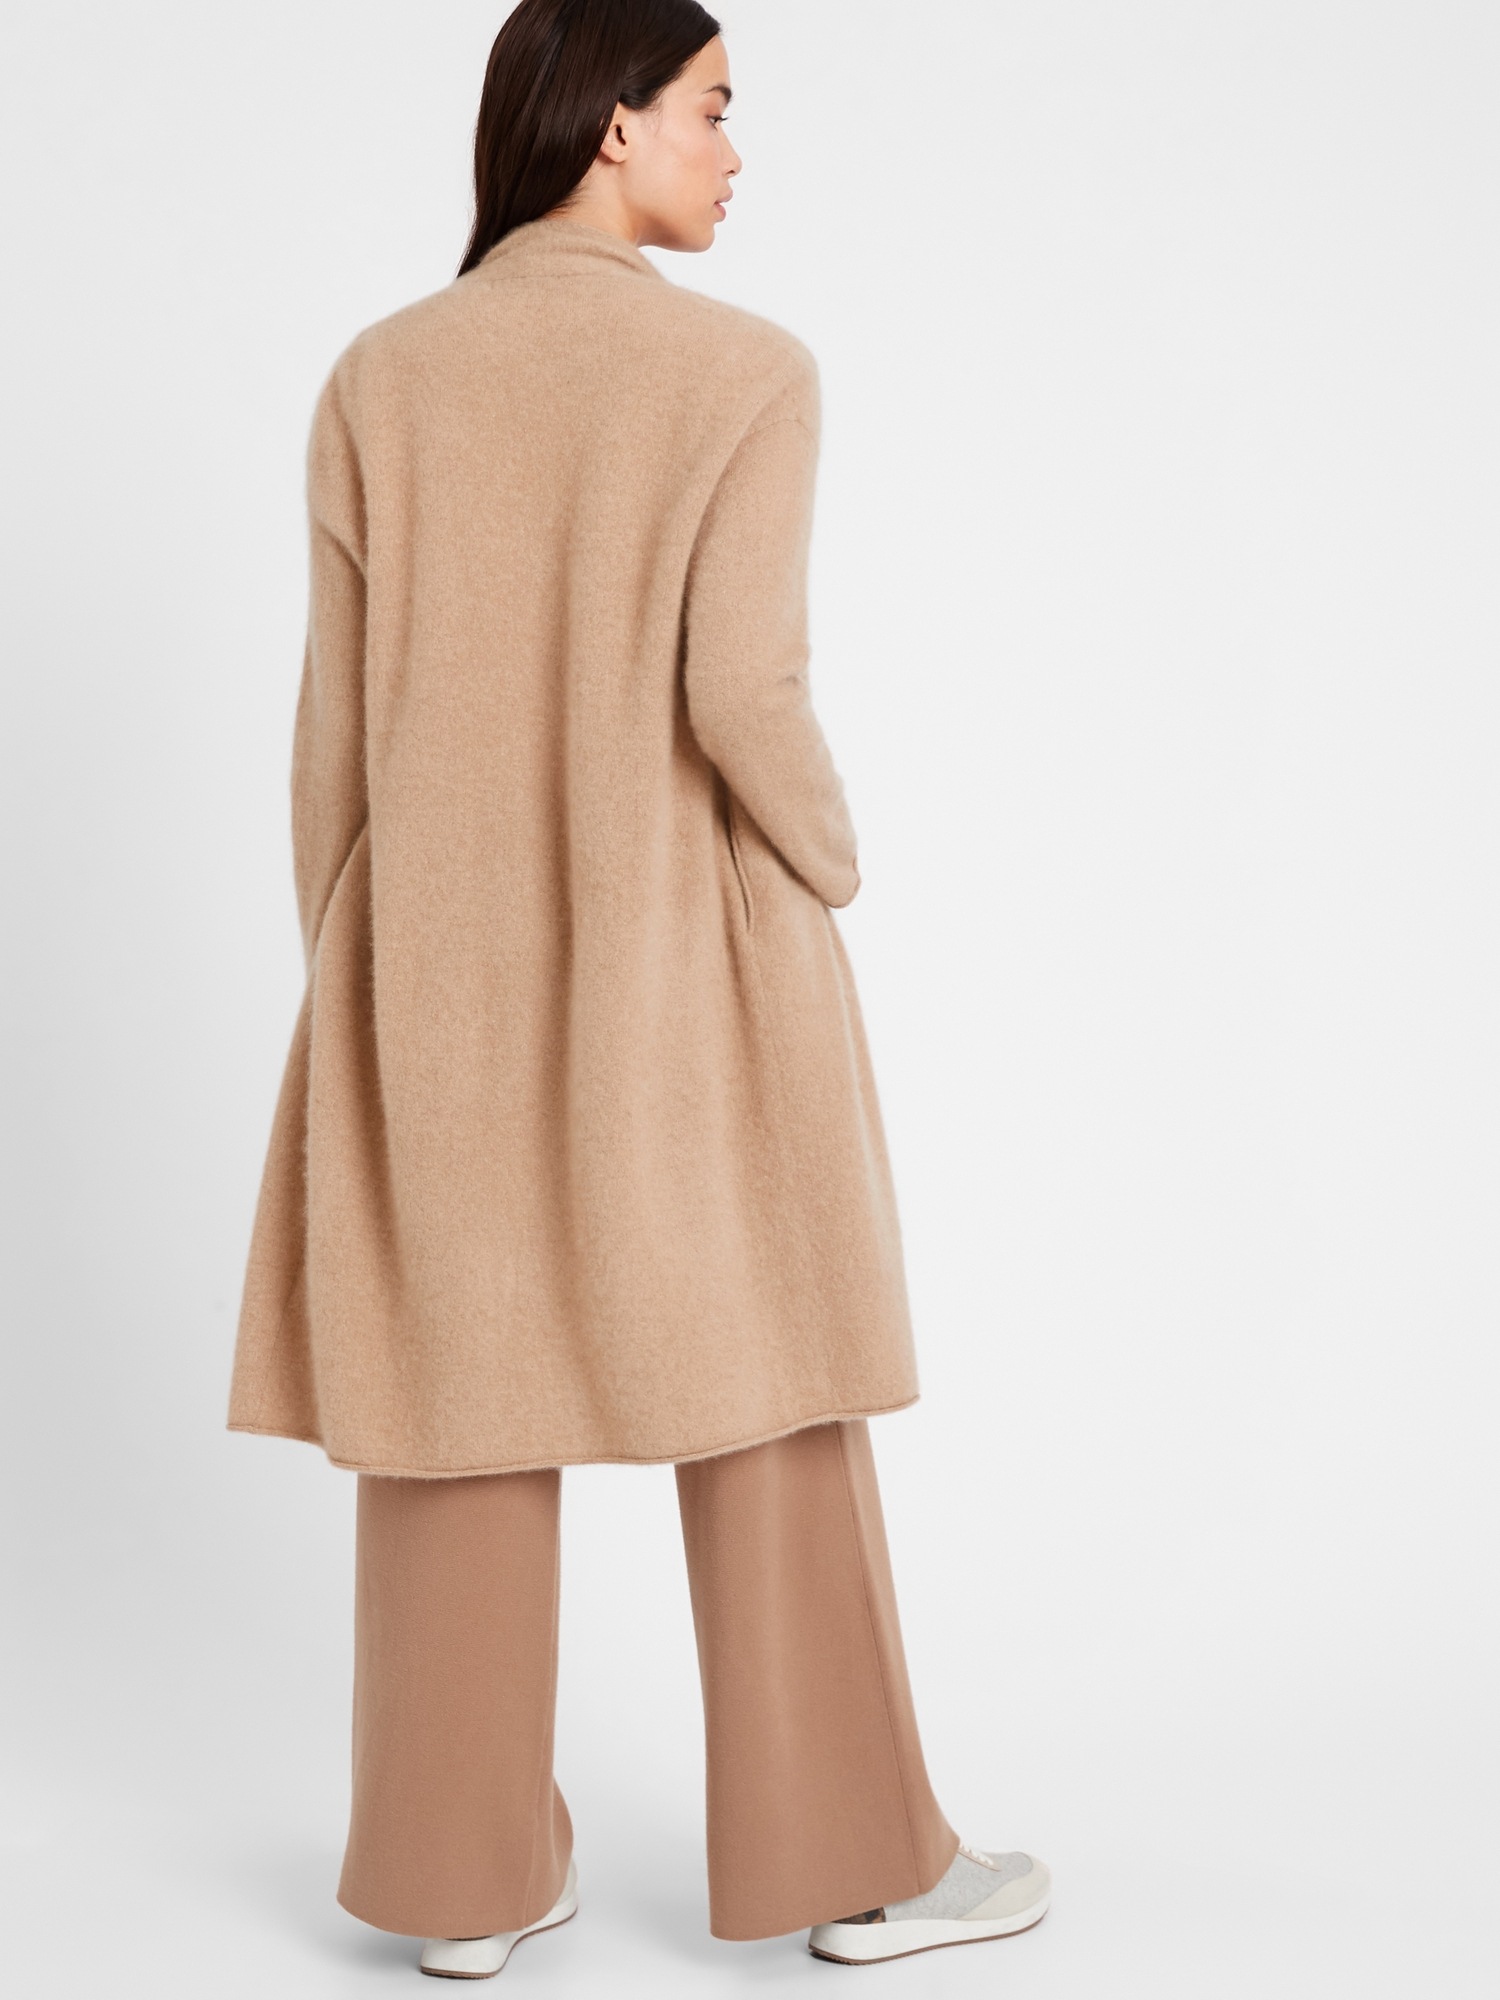 Brushed Cashmere Duster Cardigan Sweater